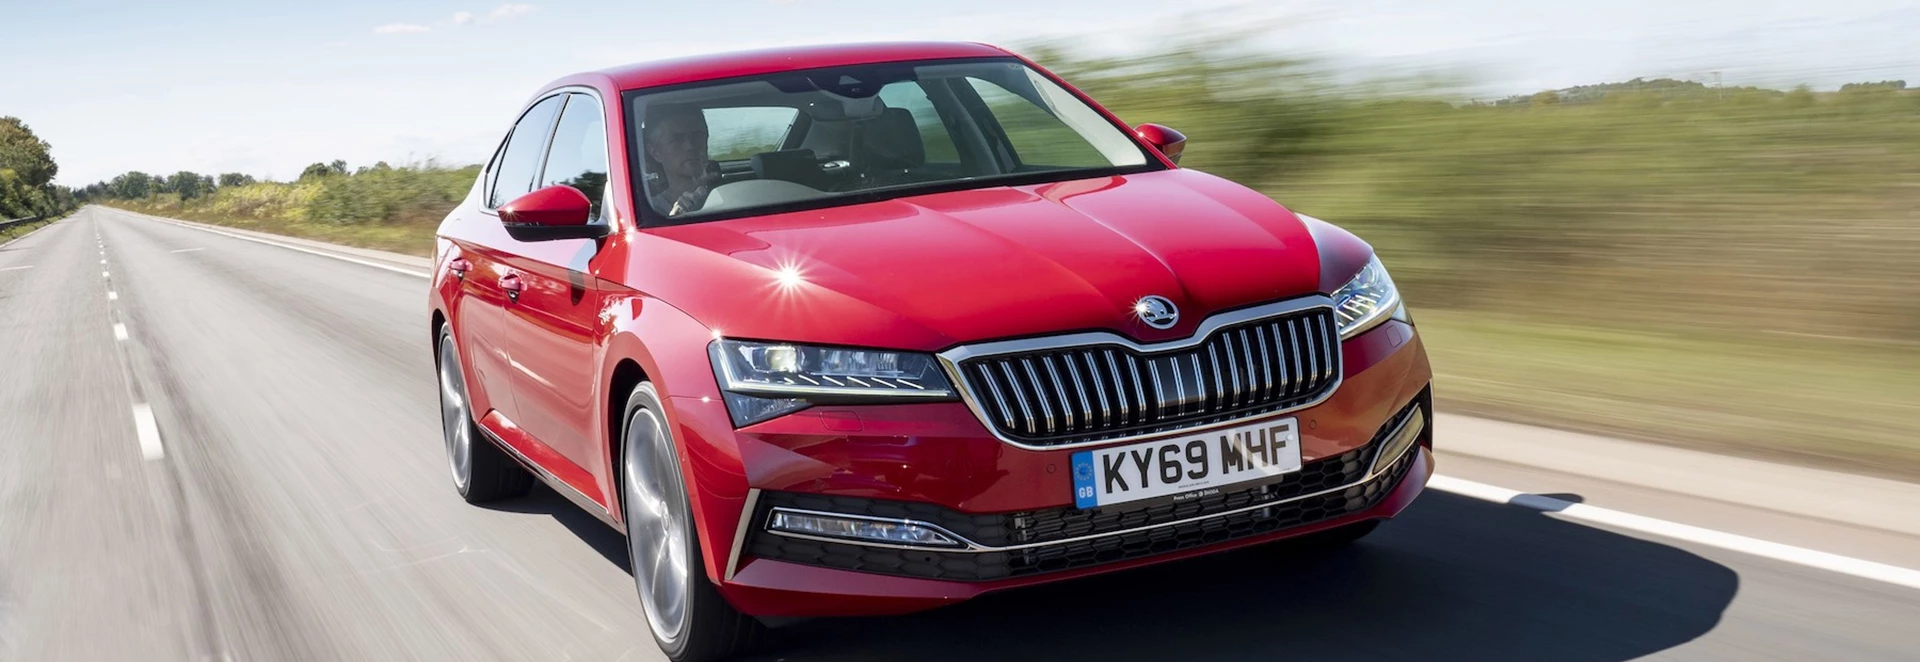 What’s new on the 2020 Skoda Superb facelift?